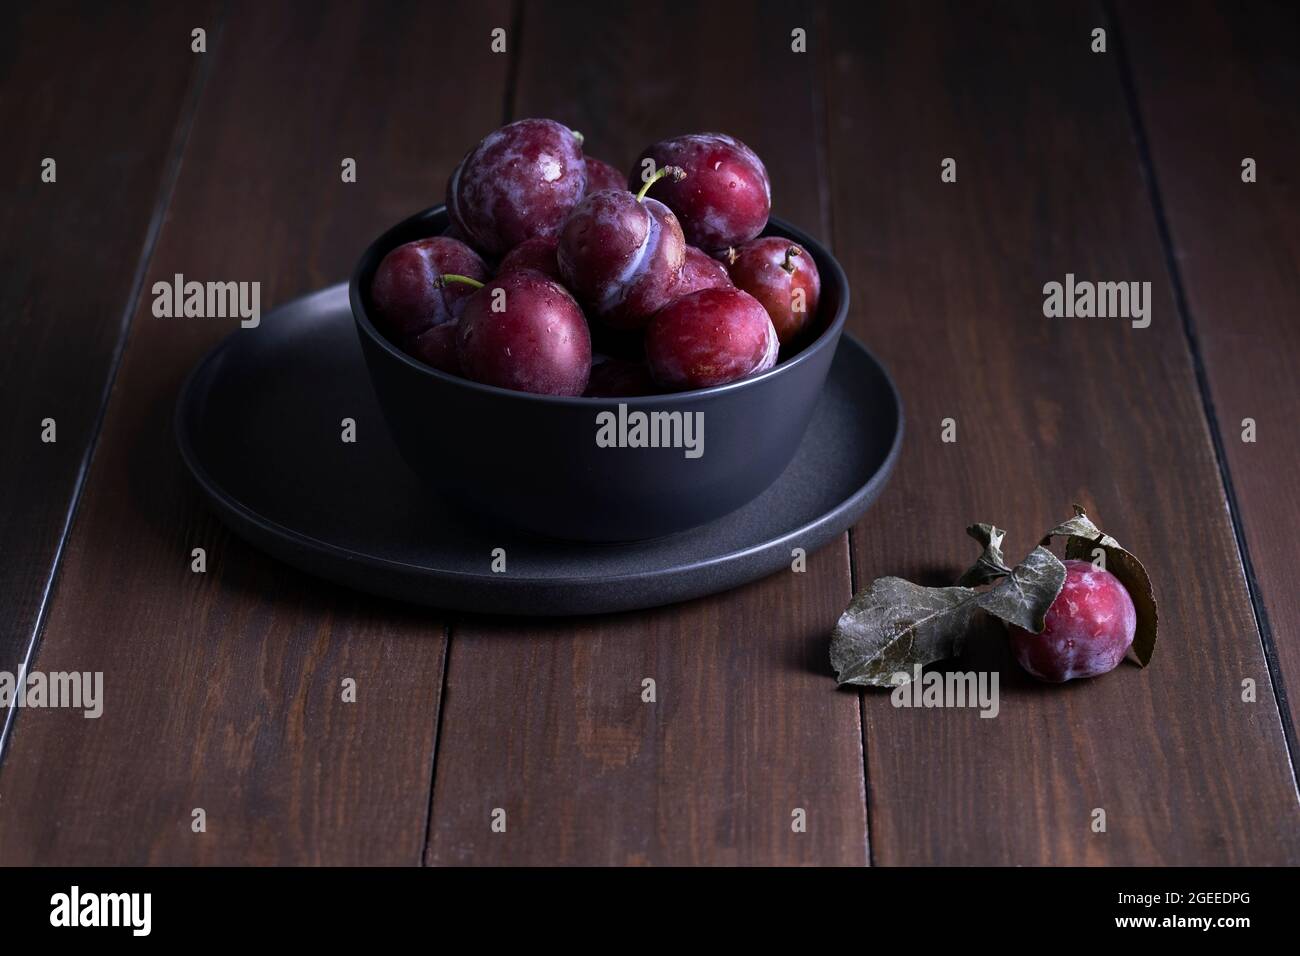 Fresh ripe plums in a dish on table from natural dark wooden boards Stock Photo